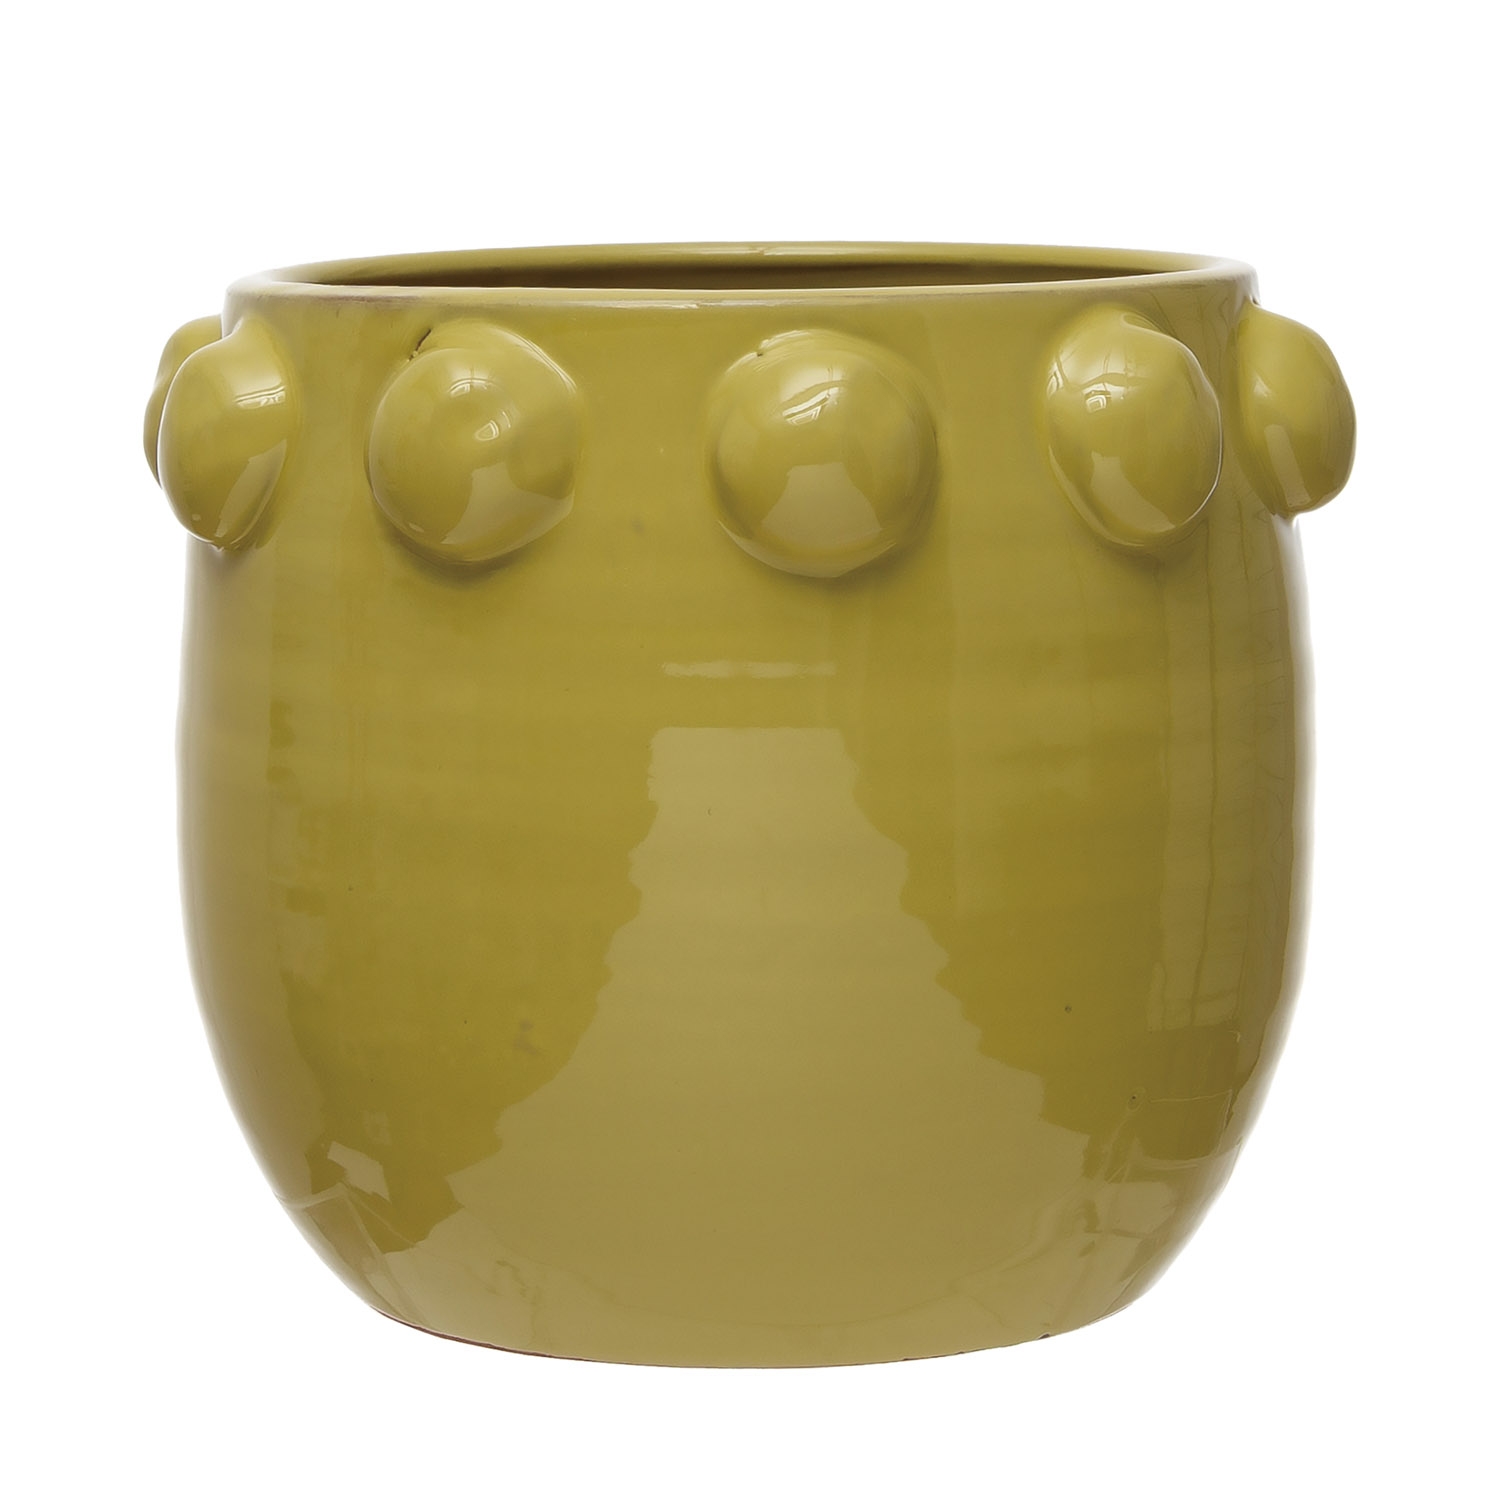 Terra-cotta Planter with Raised Dots - Image 0